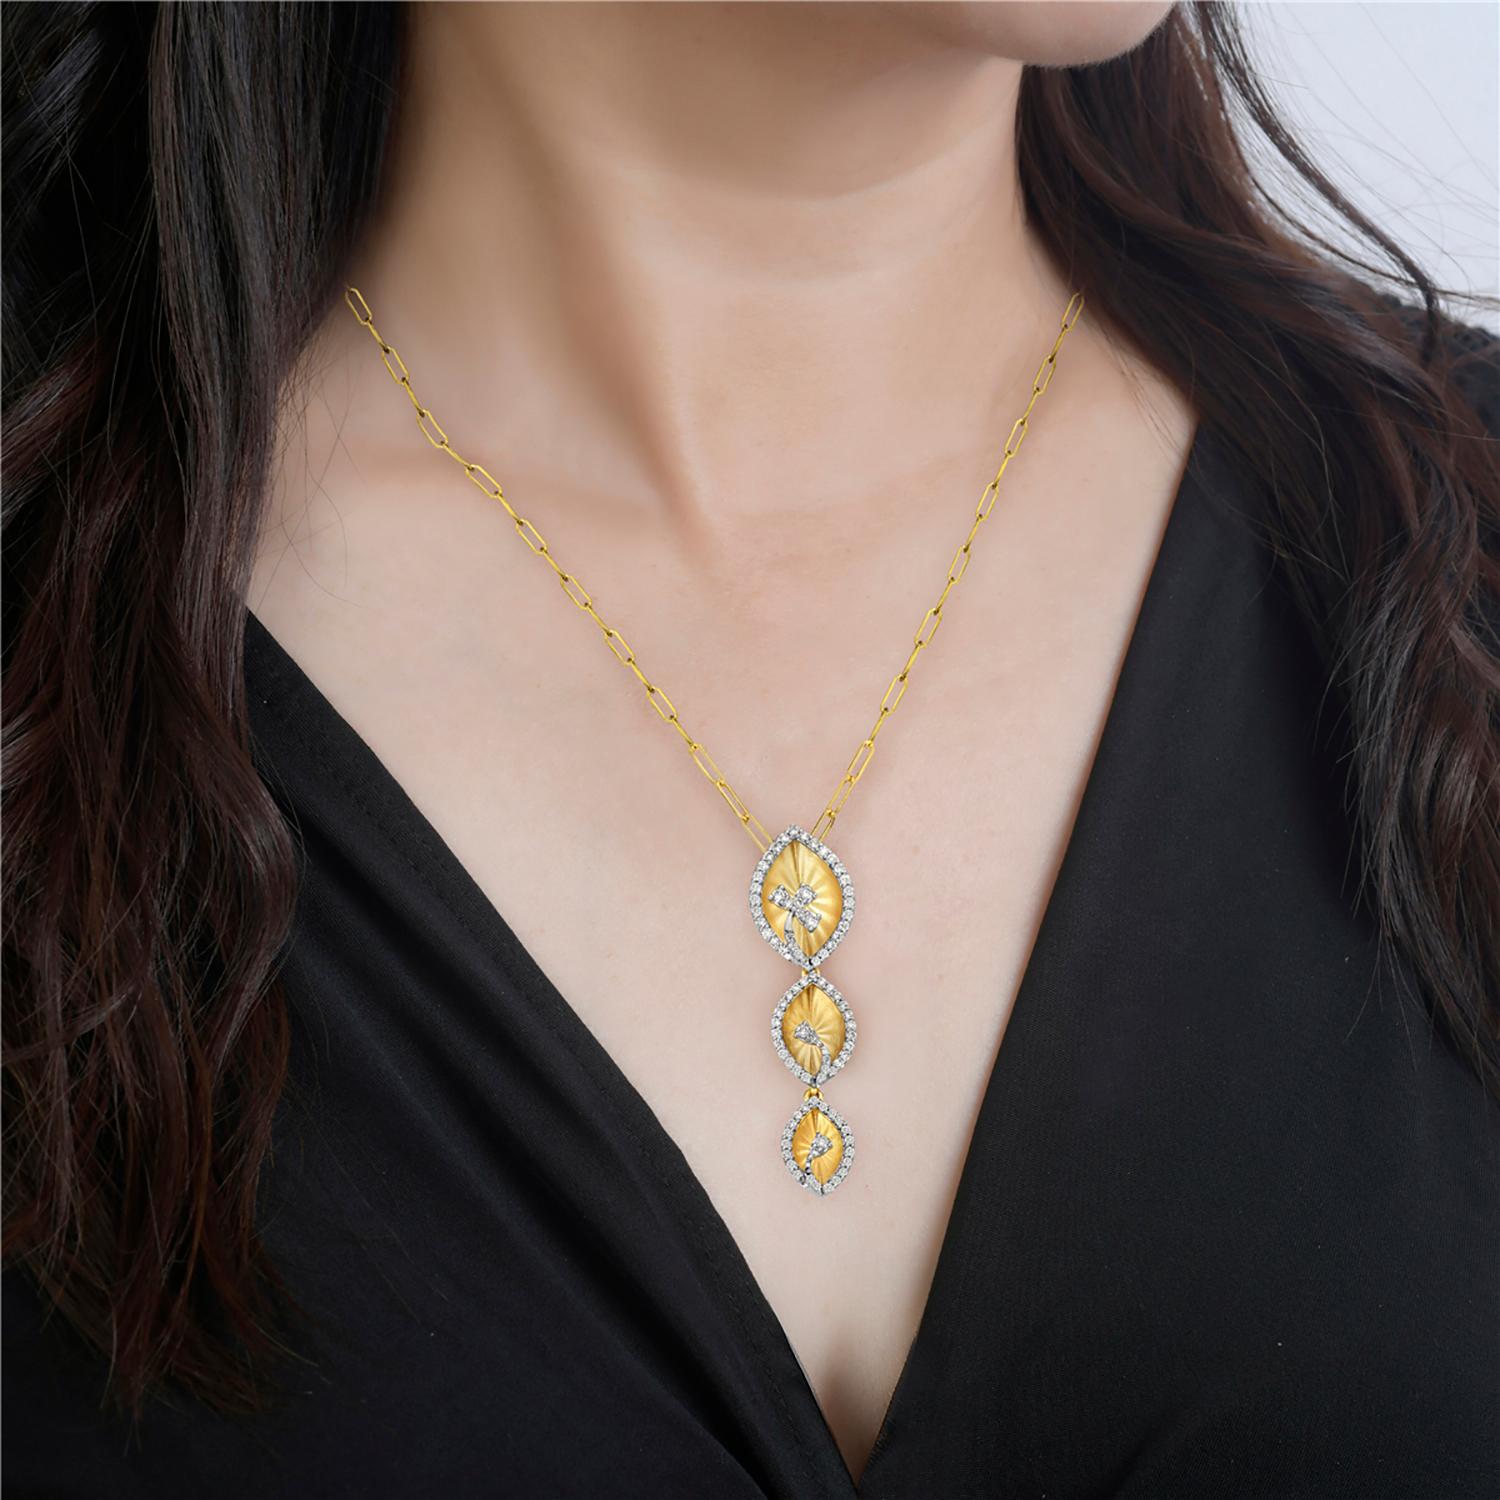 This beautiful pendant showcases three intricately carved leaves, each one with its own unique shape and texture. A shimmering halo of diamonds surrounds the leaves, providing a luxurious touch of glamour. Crafted from high-quality 14k yellow gold,